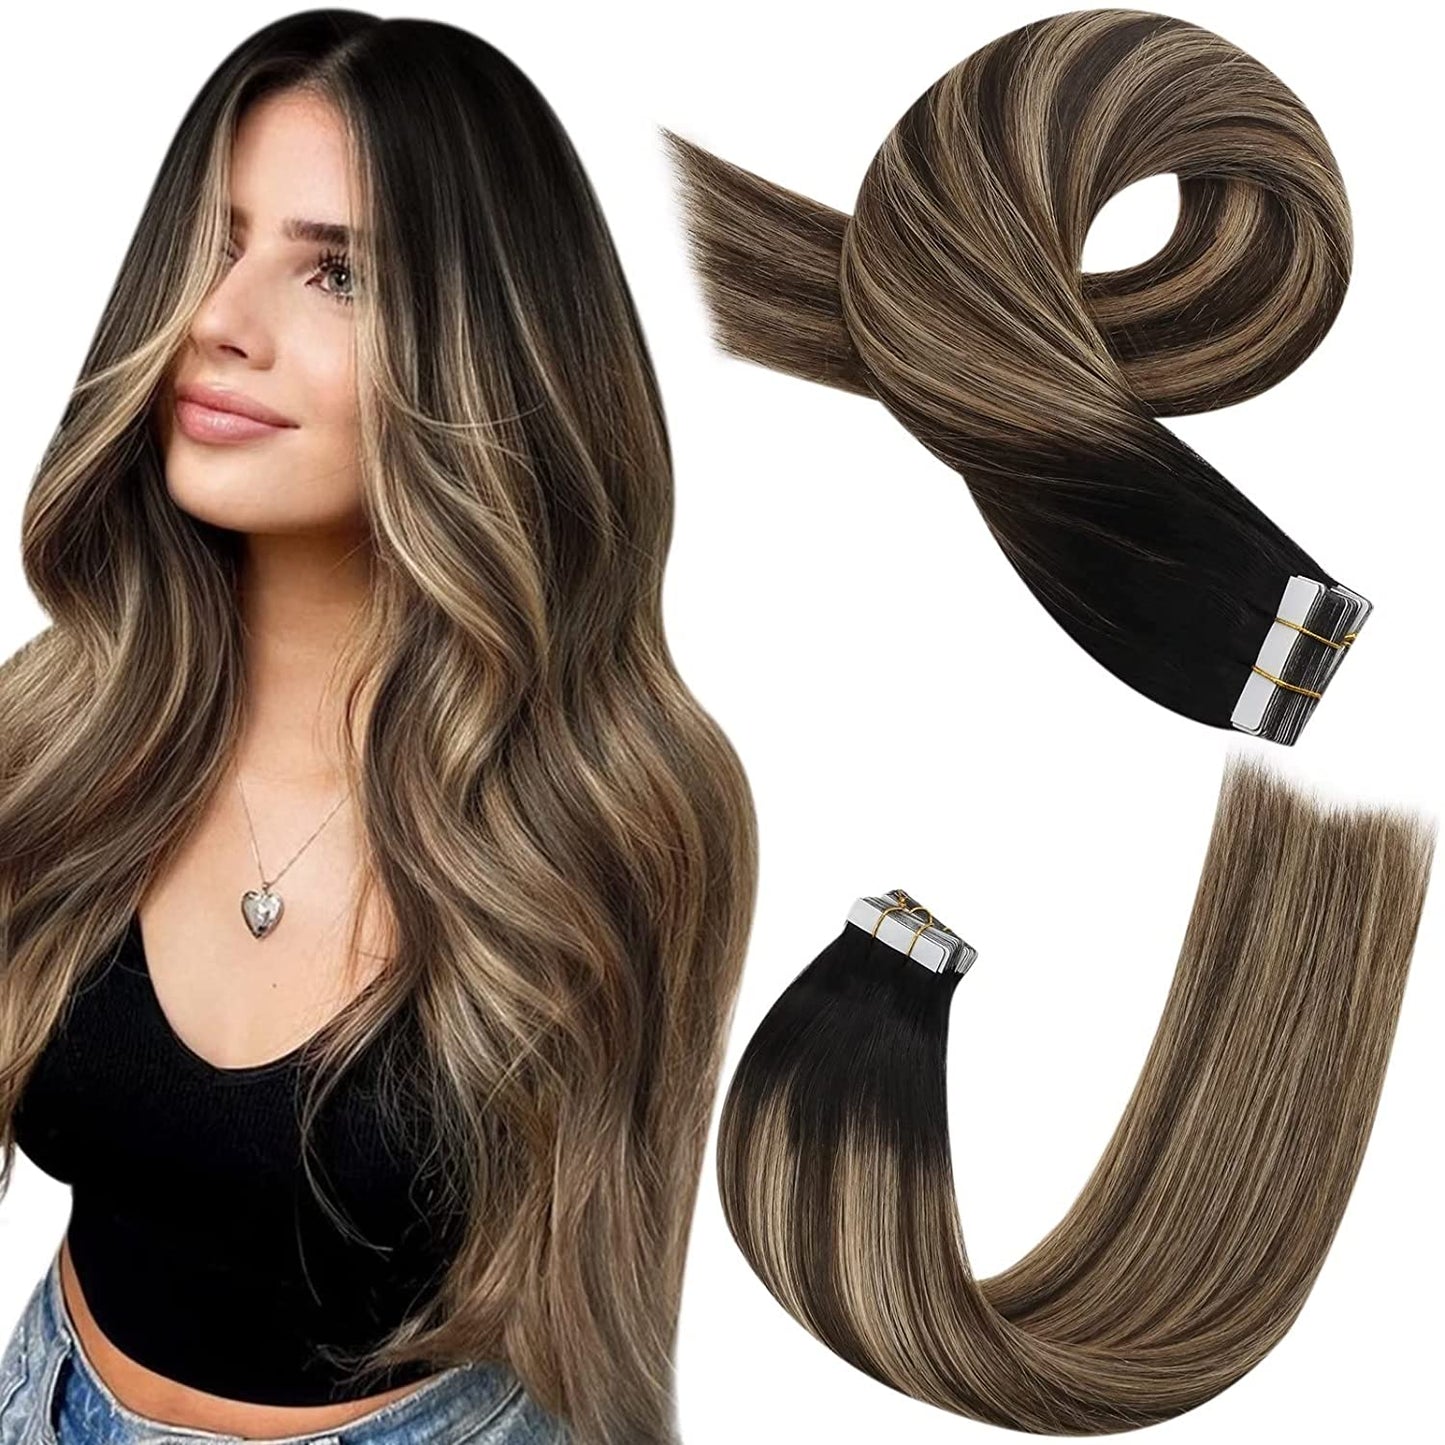 Moresoo Tape in Human Hair Extensions Balayage Blonde Hair Remy Hair Natural Soft Skin Weft Straight Seamless Hair Tape in Hair